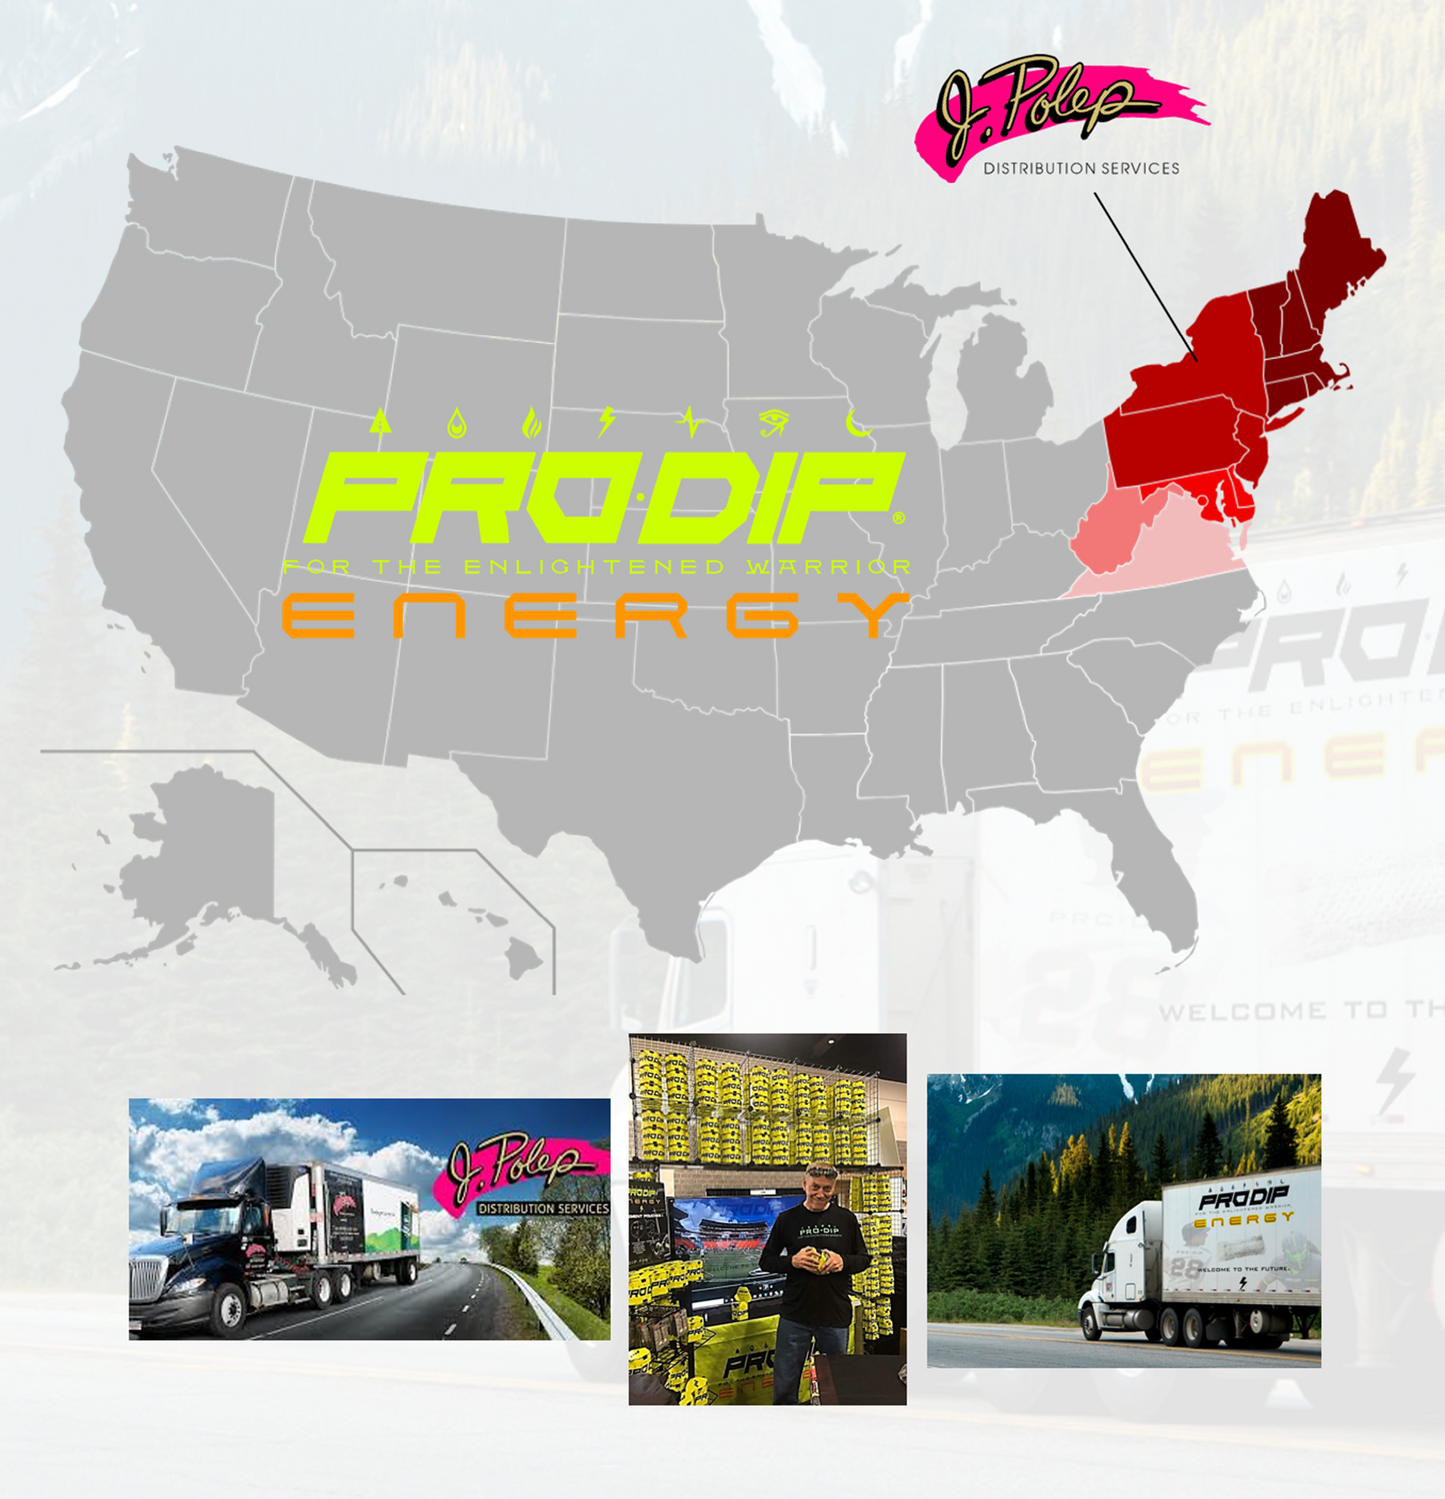 PRO-DIP® Gains Northeast Region on It's Quest for National Distribution